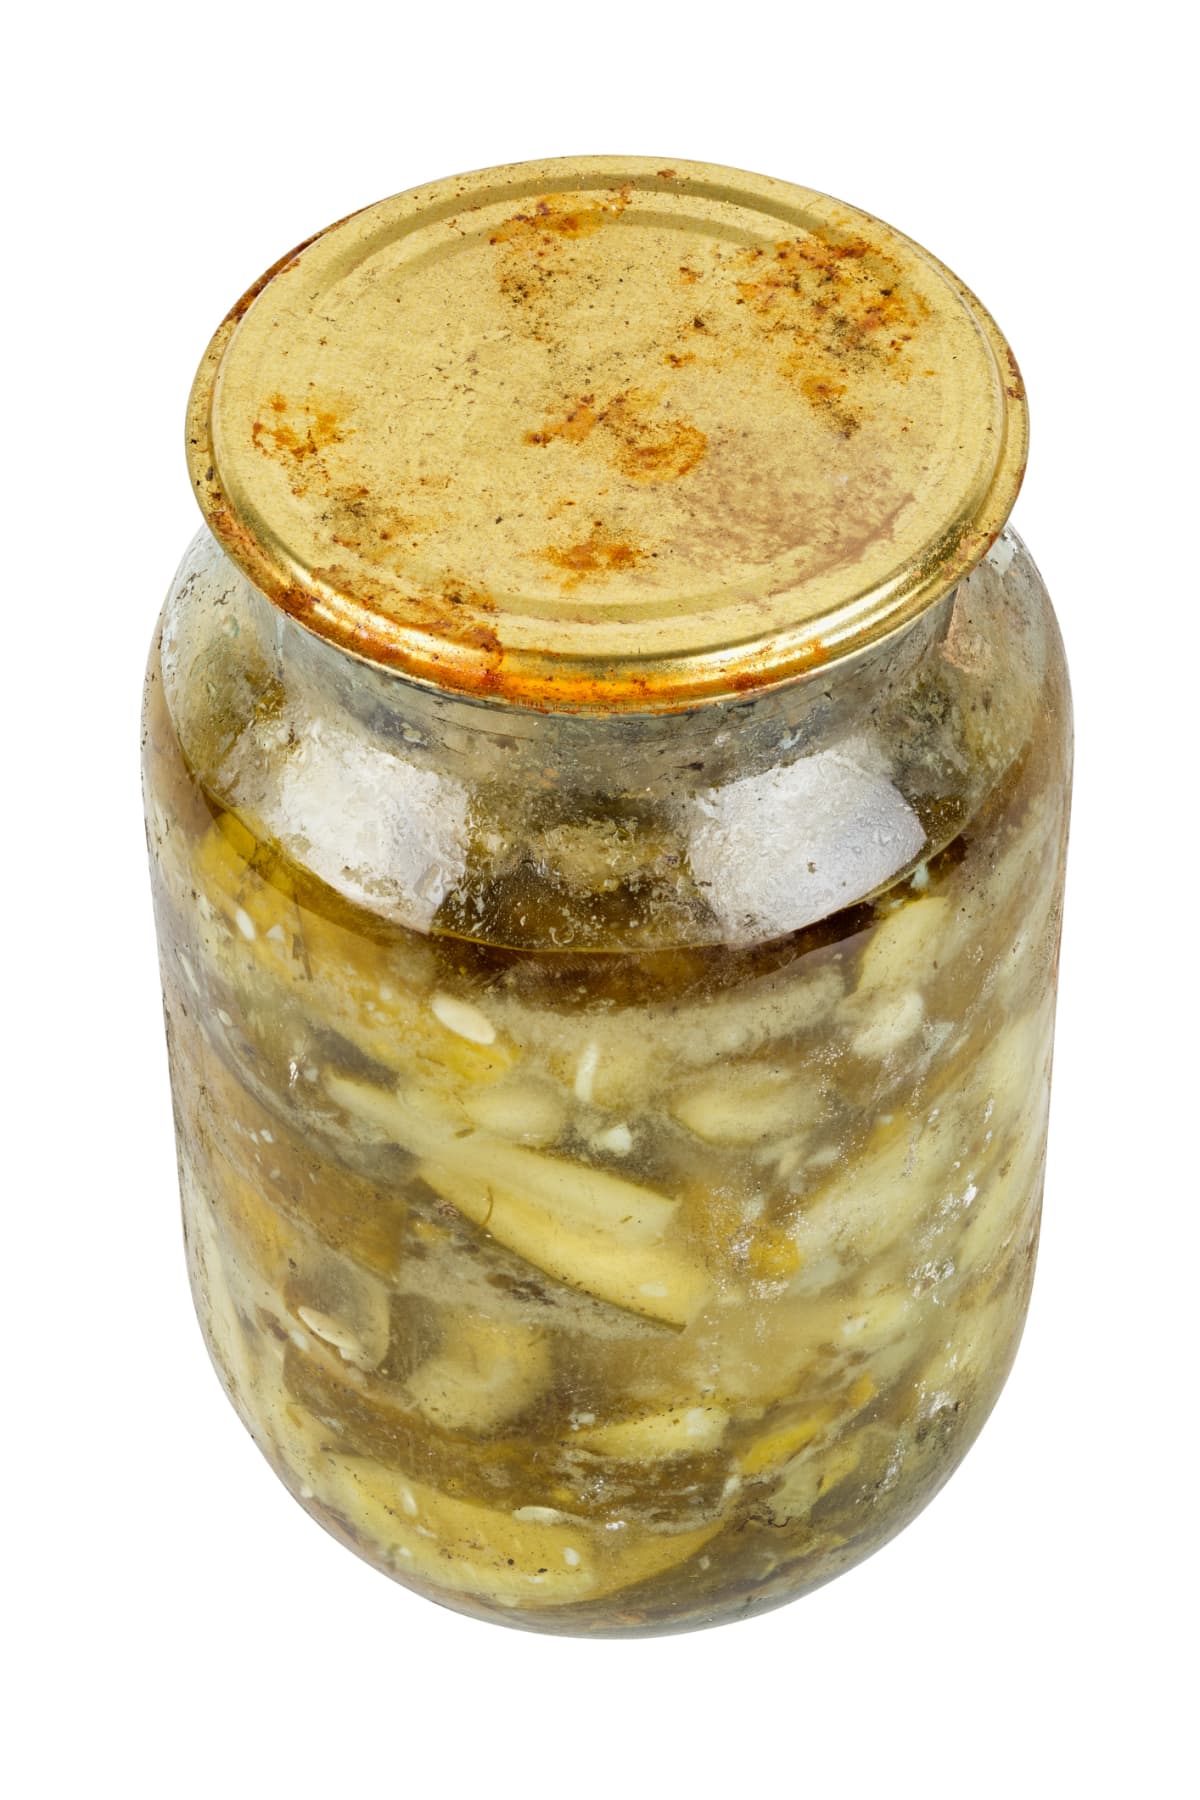 old pickles in glass jar with rusted cap in bad condition isolated on white background.